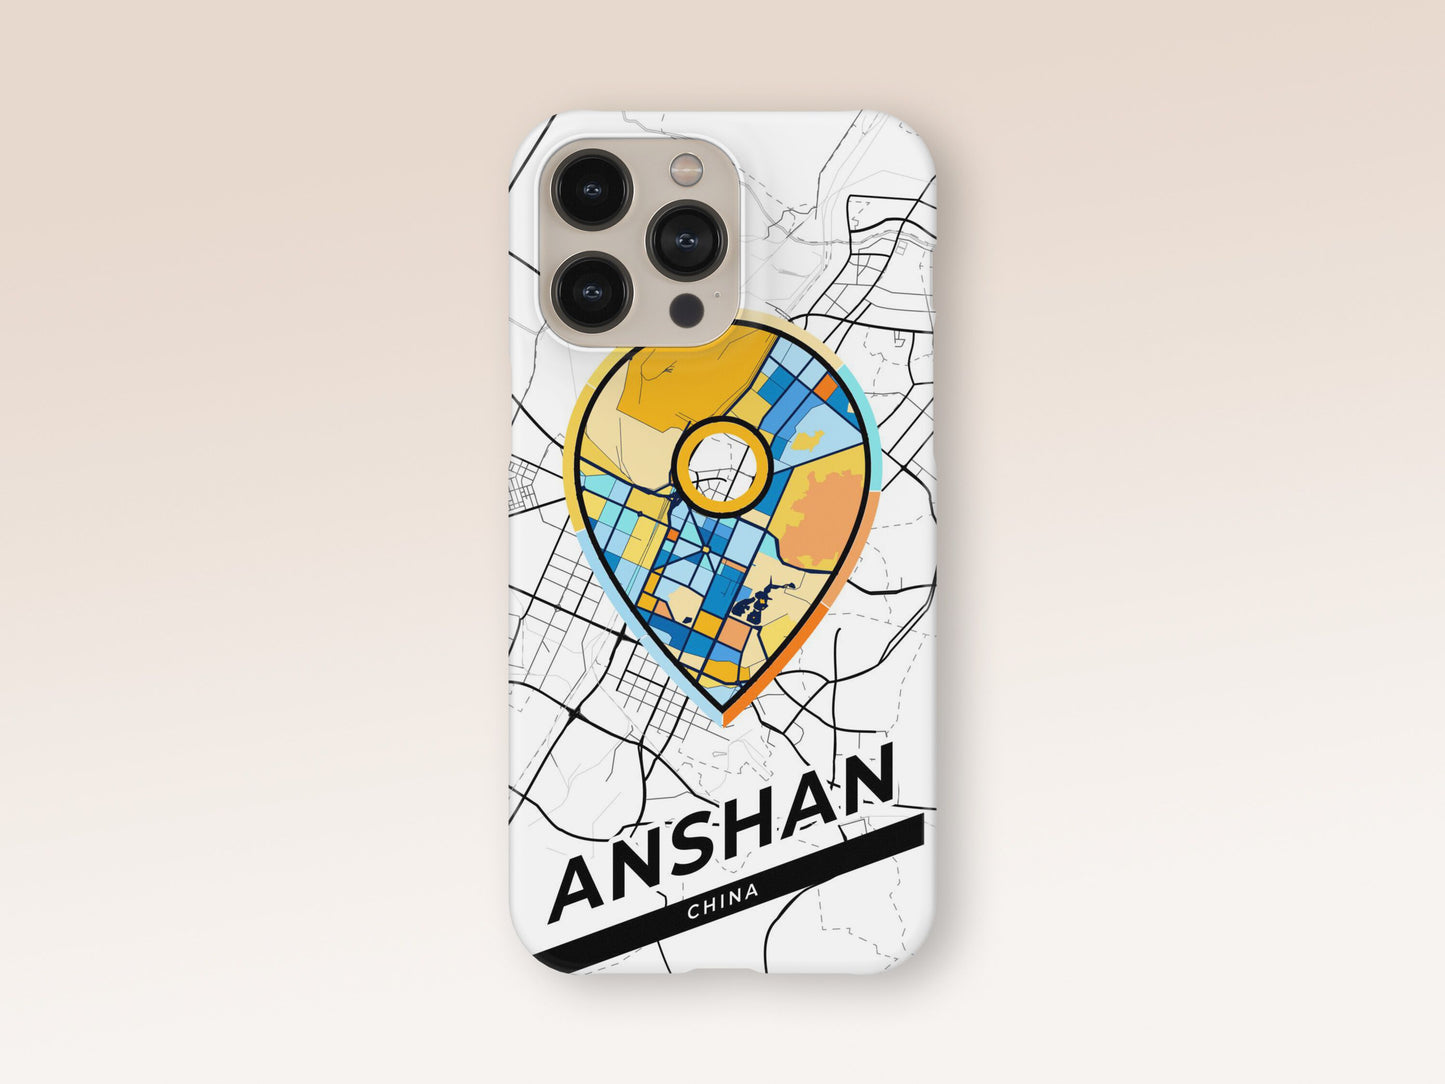 Anshan China slim phone case with colorful icon. Birthday, wedding or housewarming gift. Couple match cases. 1